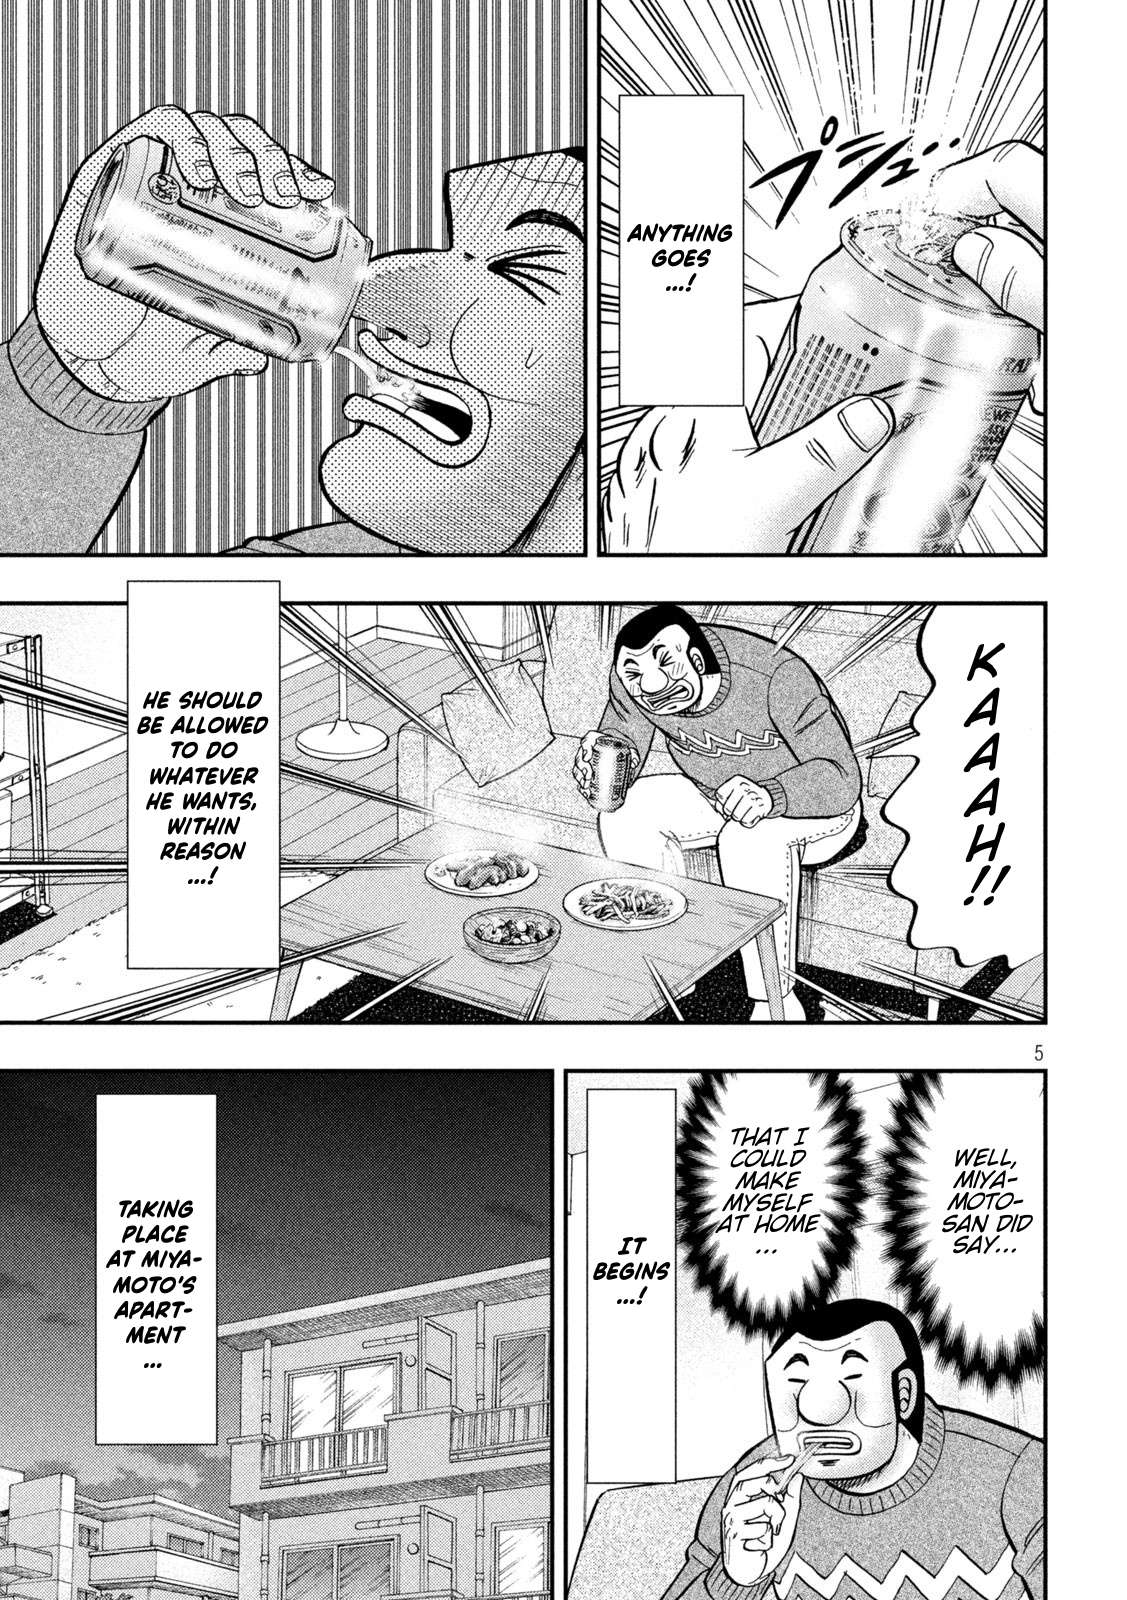 One Day Outing Foreman - chapter 89 - #5